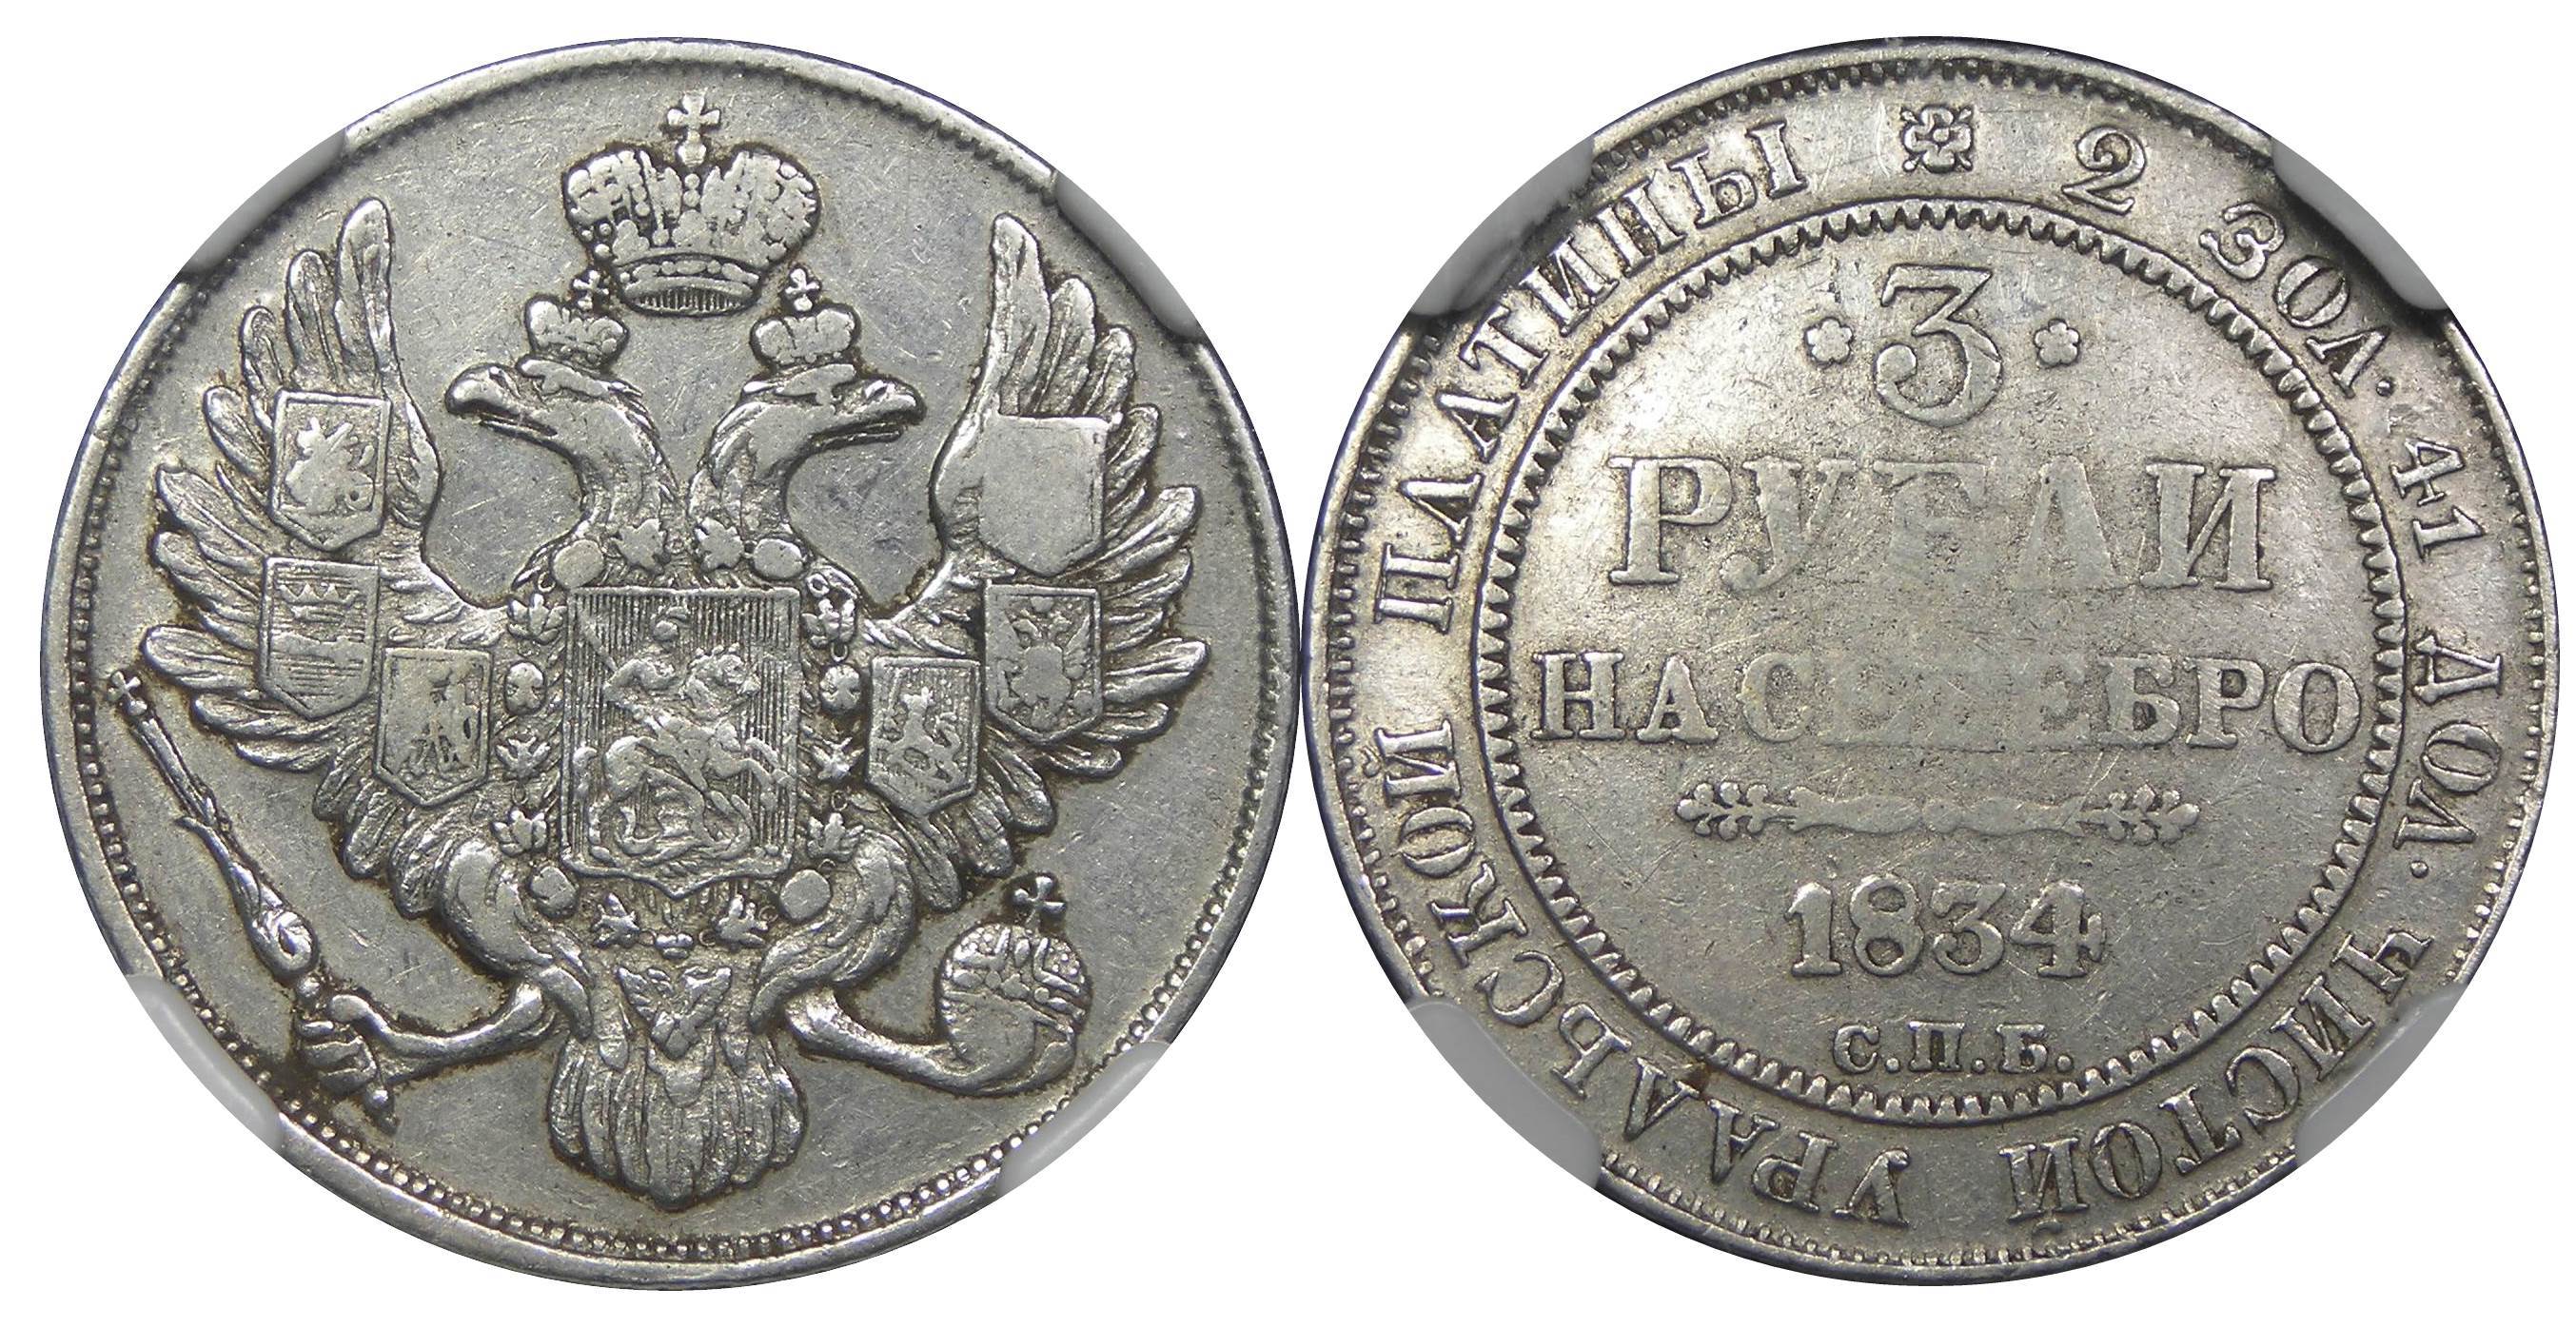 The World's only Circulating Platinum Coin - The Platinum 3 Roubles ...